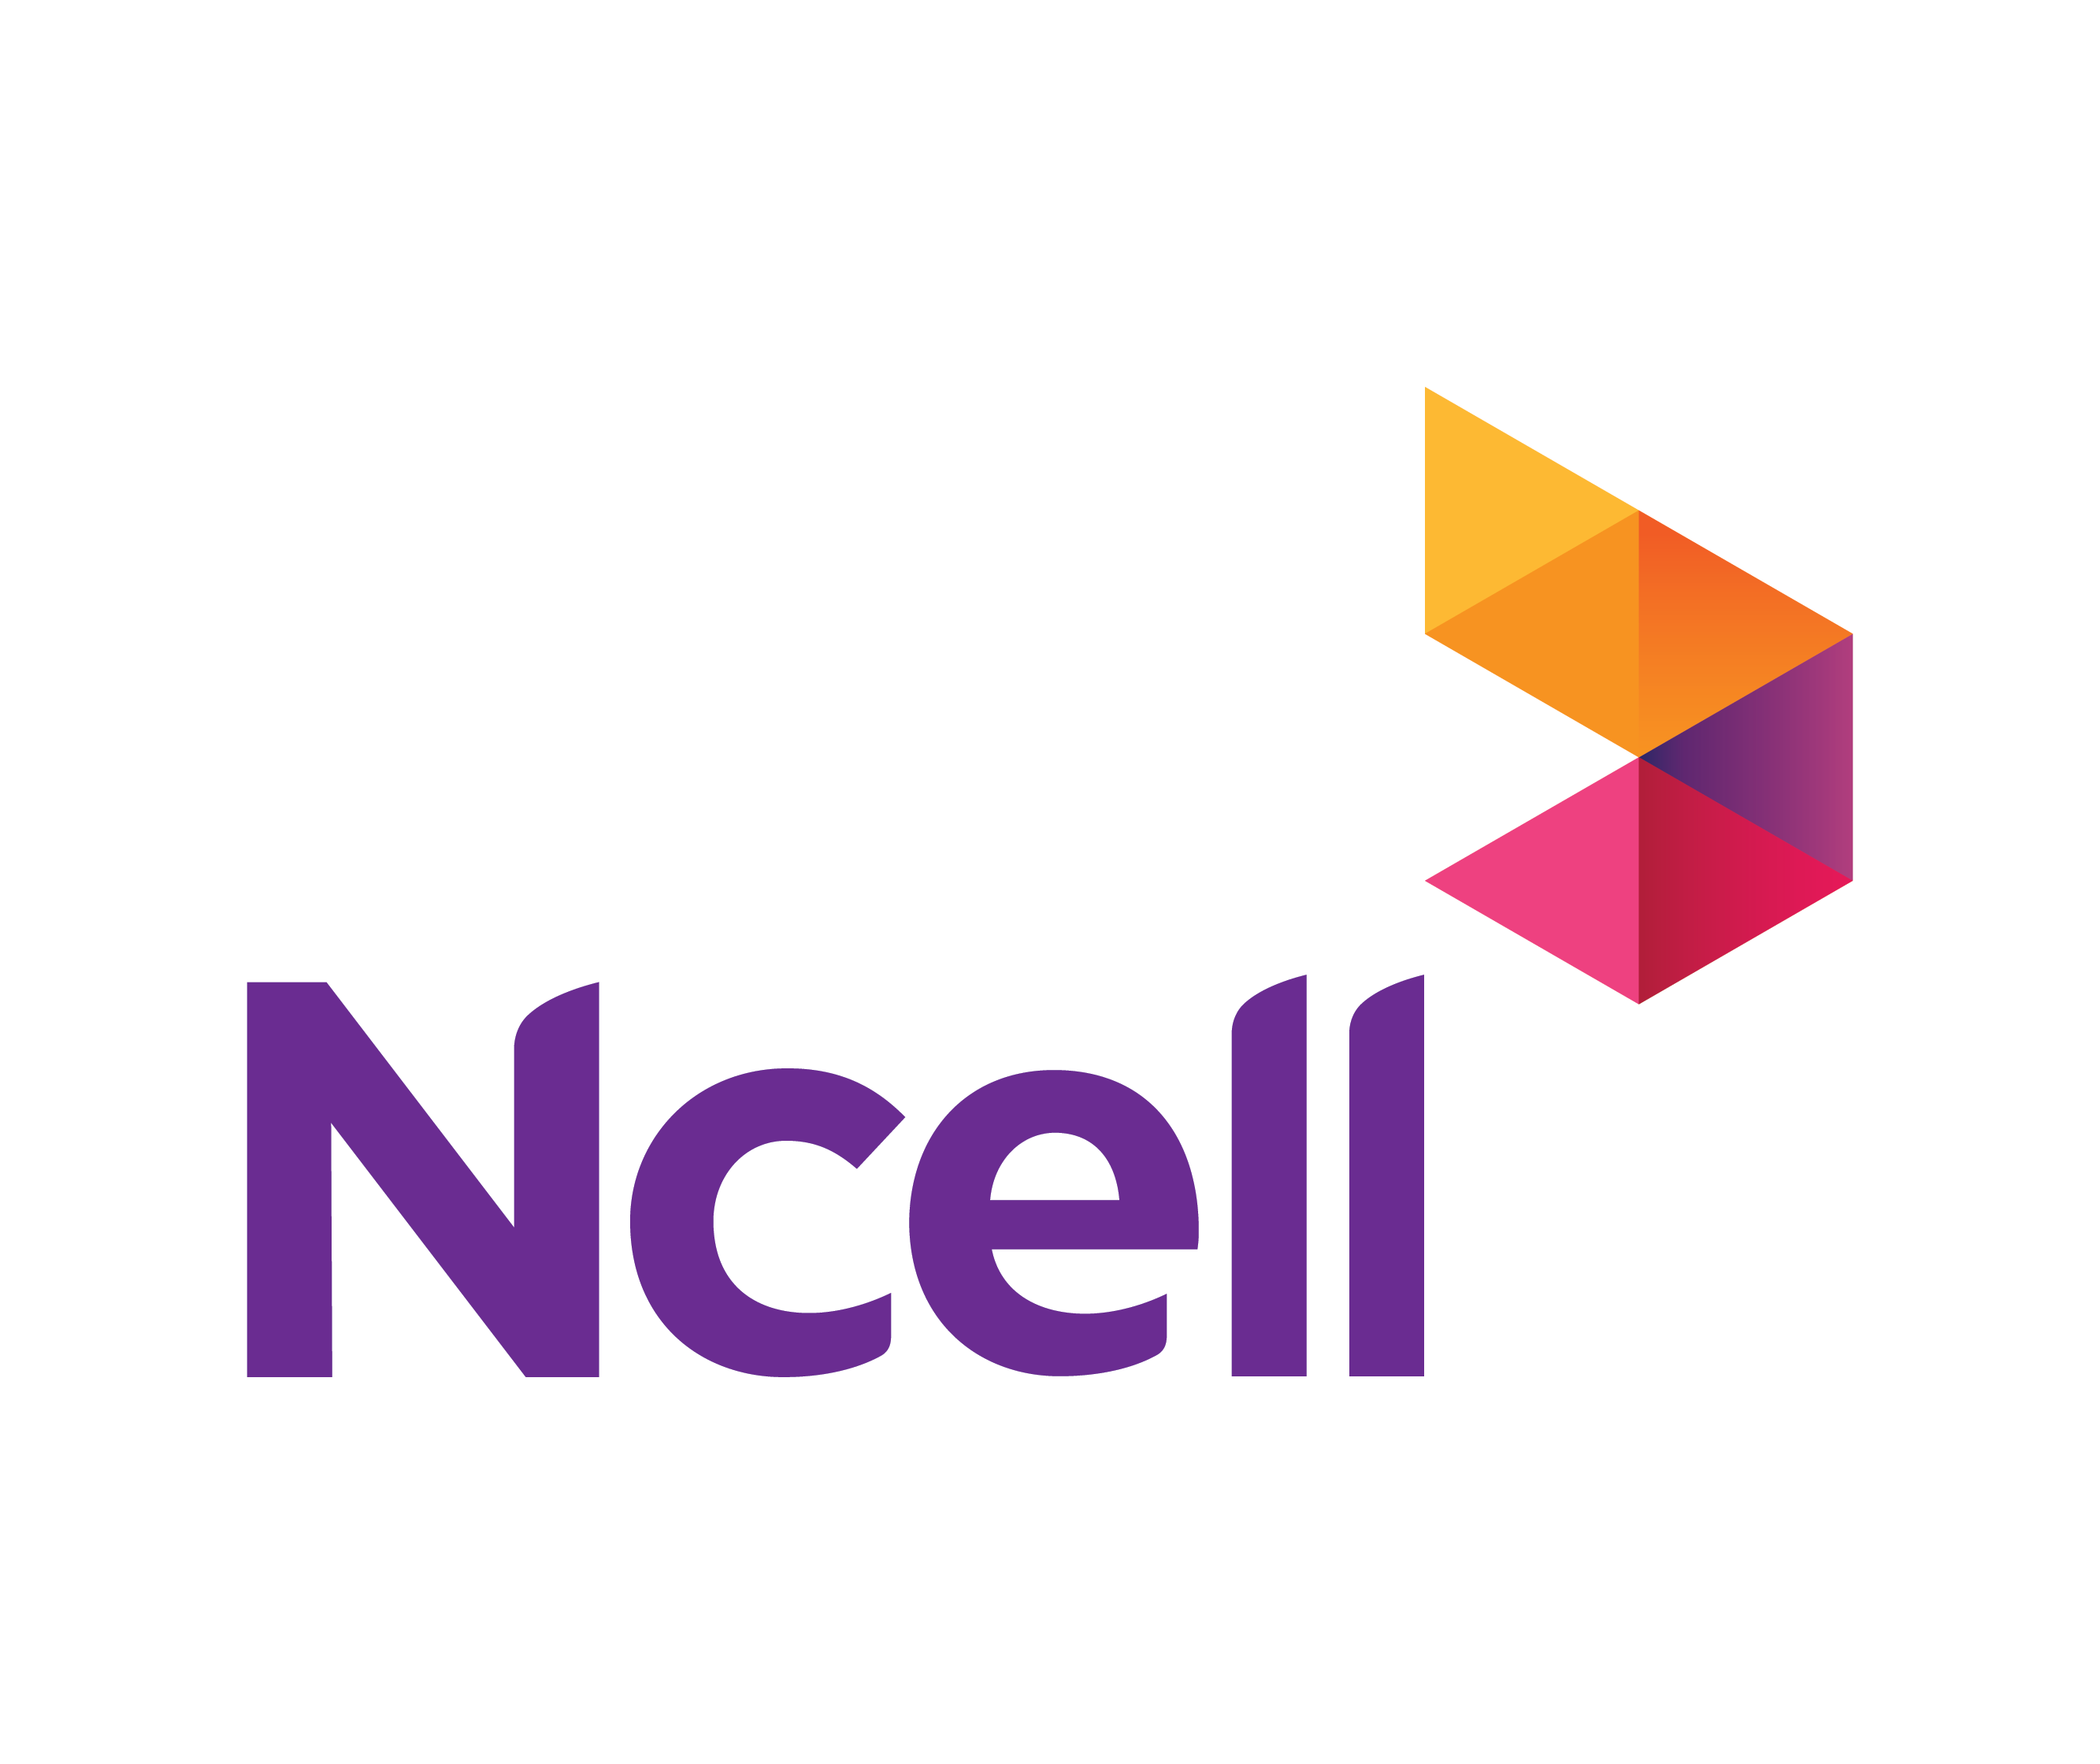 Ncell wins ‘Telecom Company of the Year’ and ‘Infrastructure Initiative of the Year’ awards at the 2022 Asian Telecom Awards